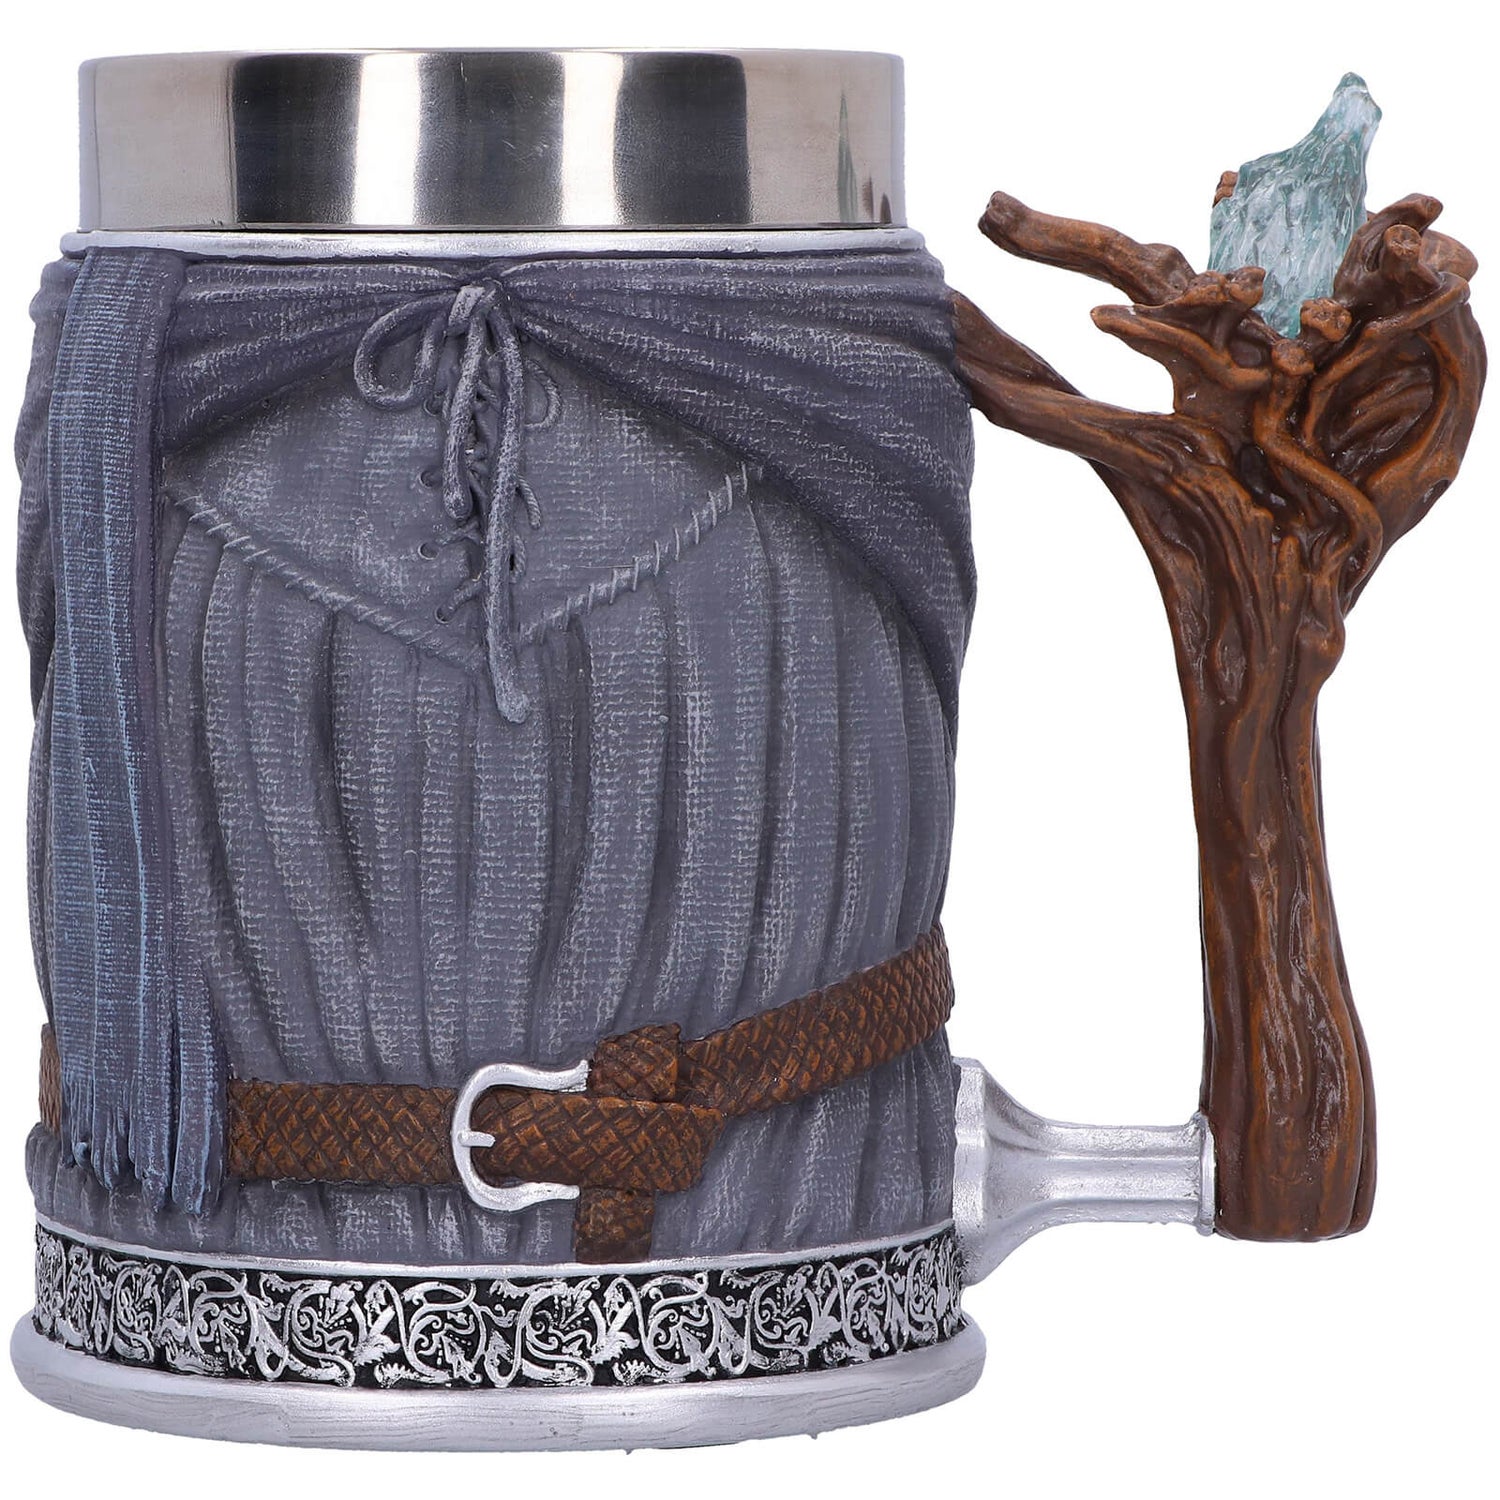 Nemesis Now - Lord of the Rings Gandalf The Grey Tankard 15.5cm